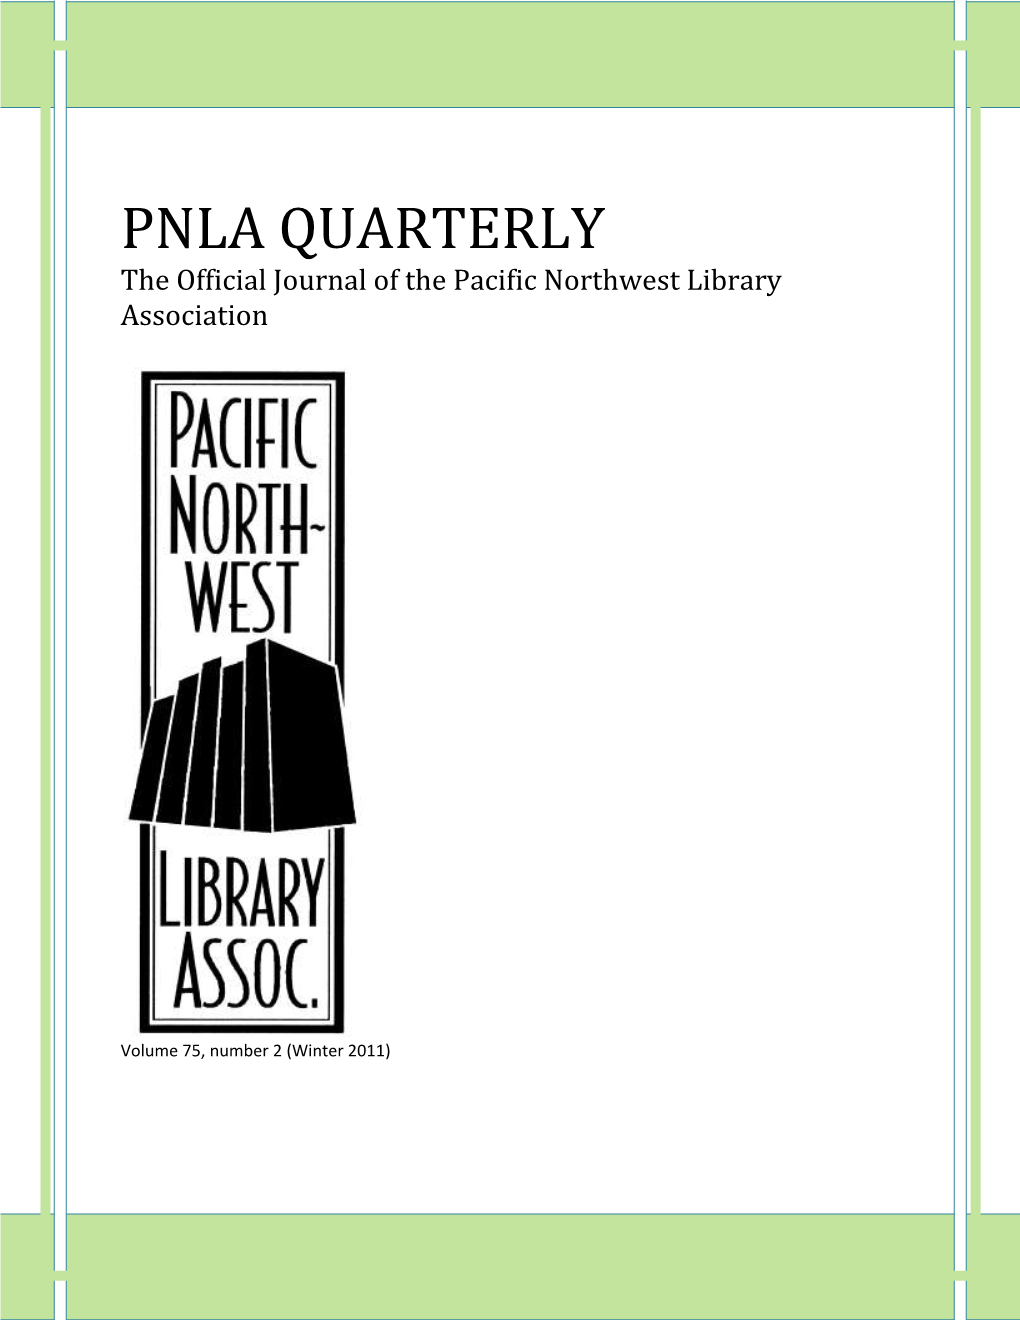 PNLA QUARTERLY the Official Journal of the Pacific Northwest Library Association